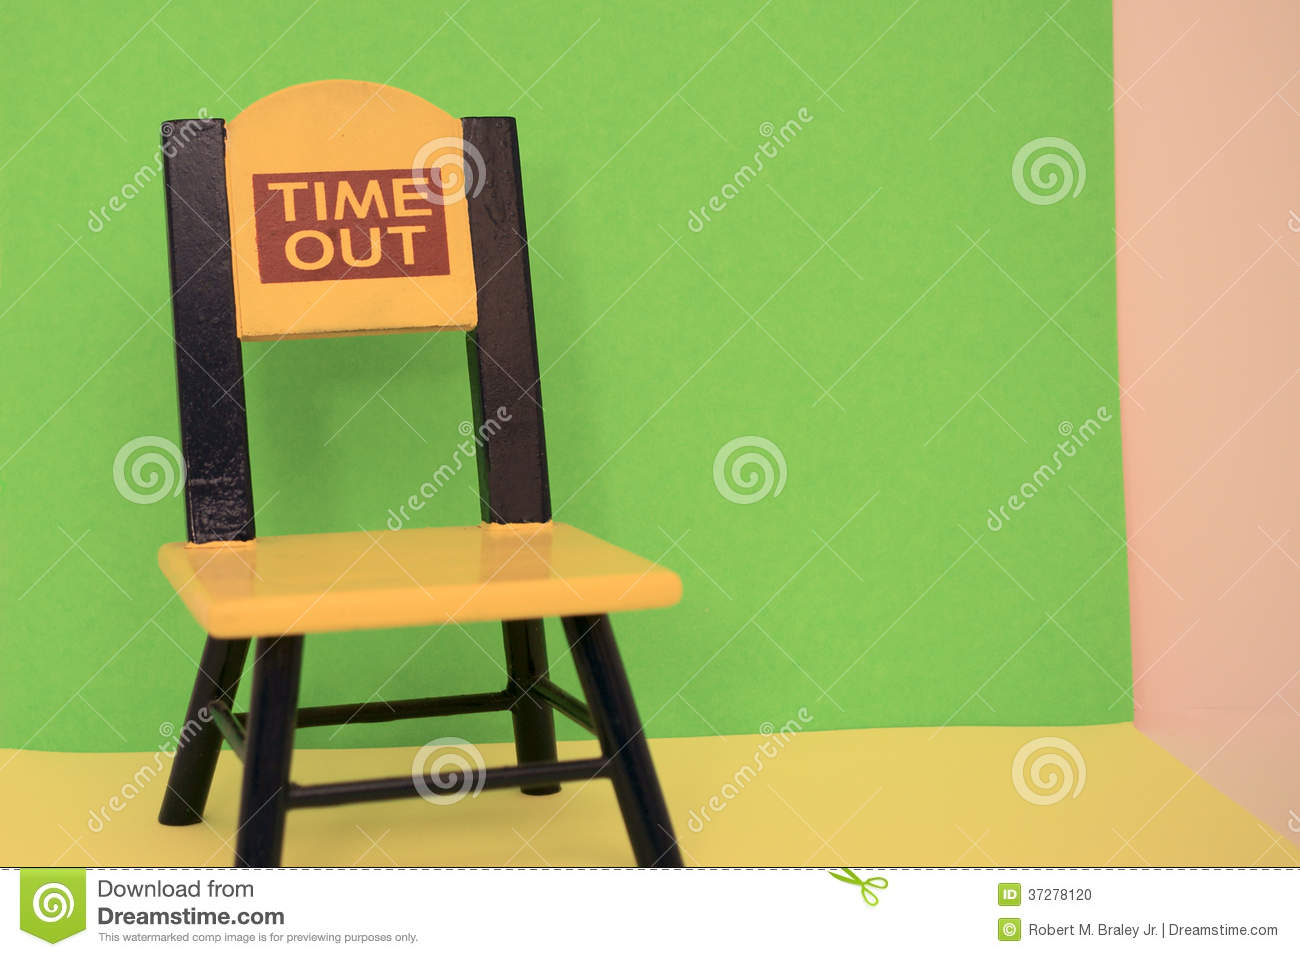 Empty Time Out Chair Blue Yellow Red  Green And Pink Walls And Yellow